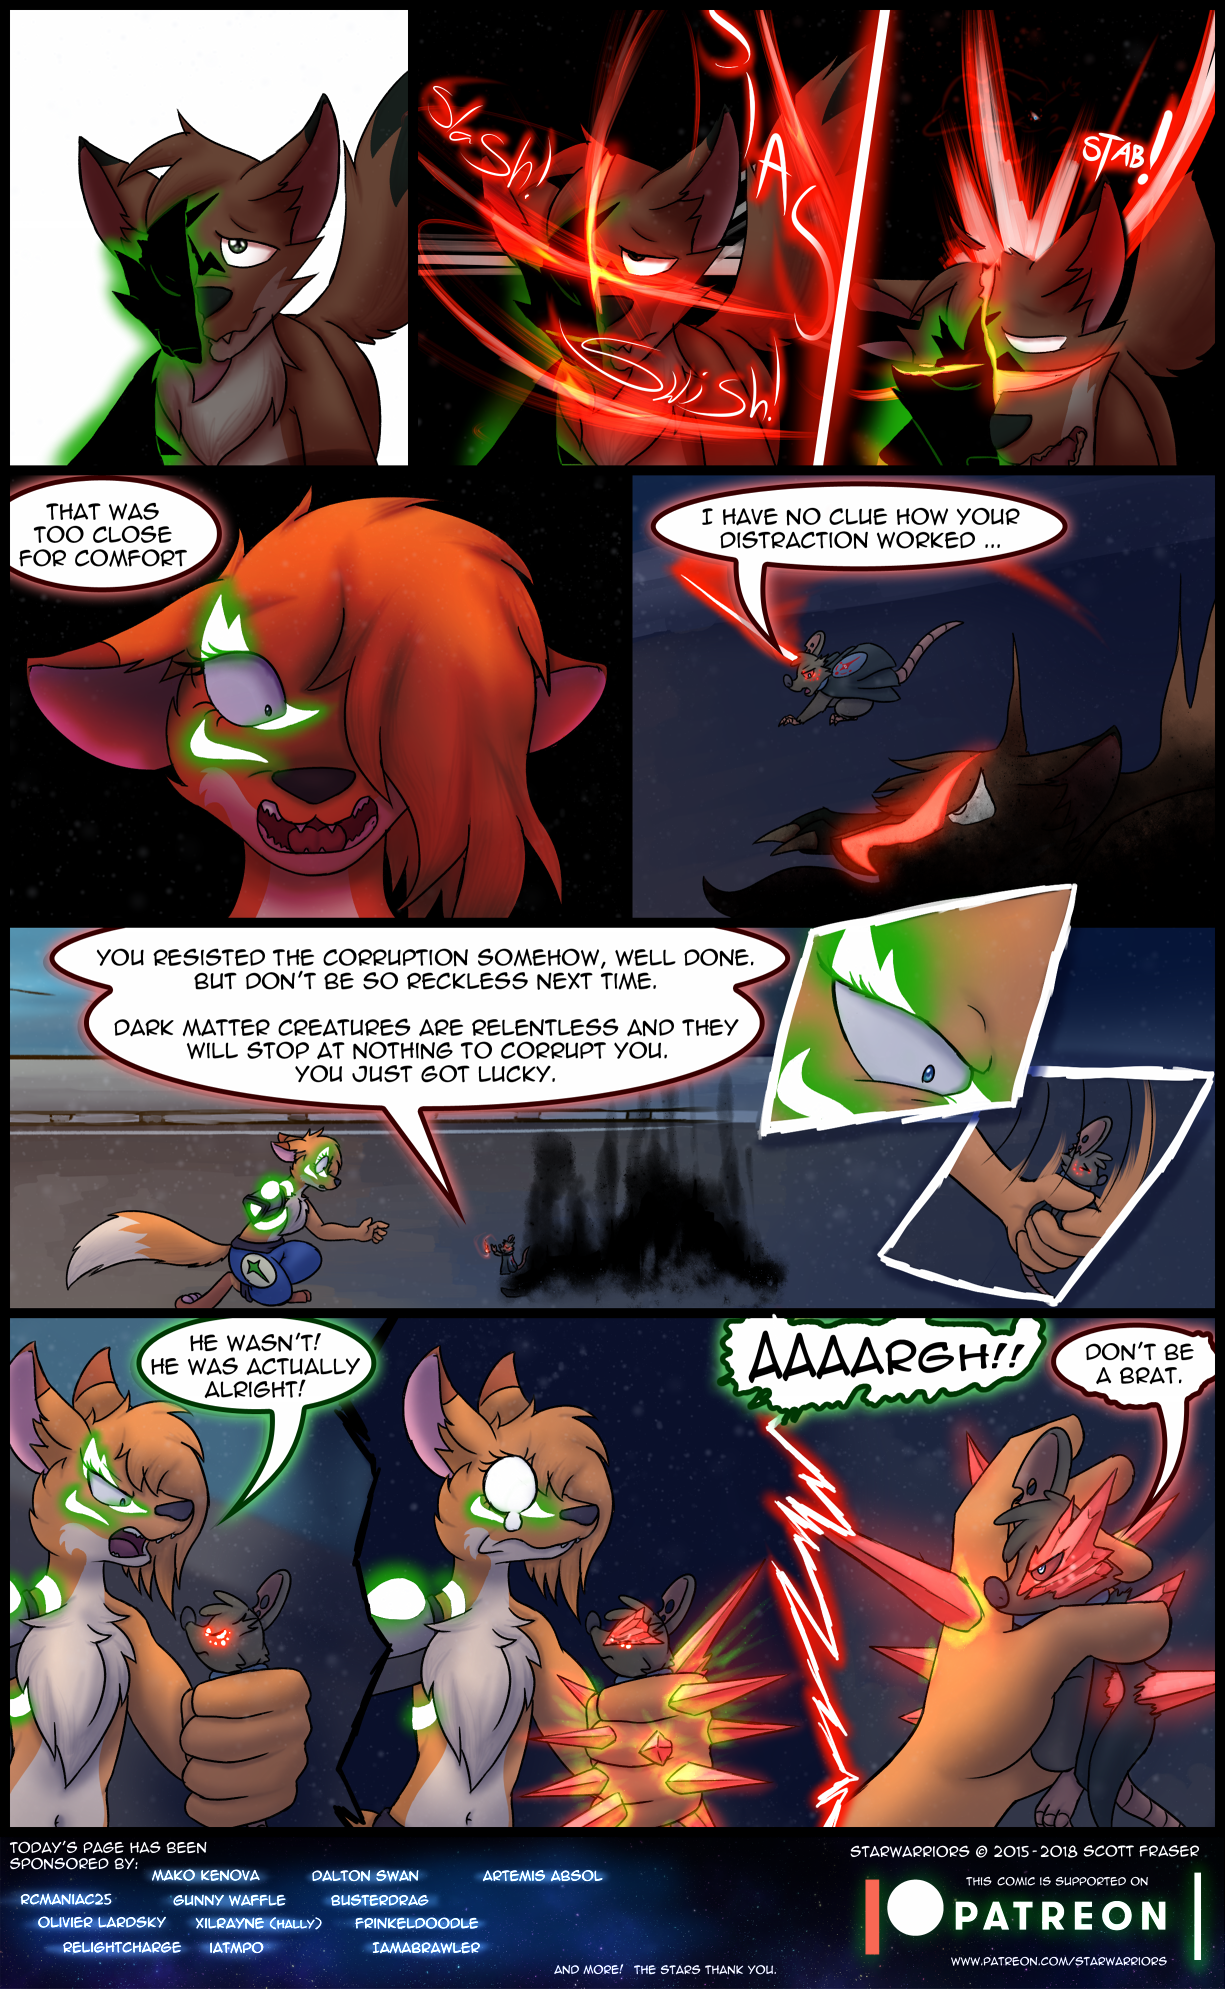 Ch3 Page 56 – Too Close